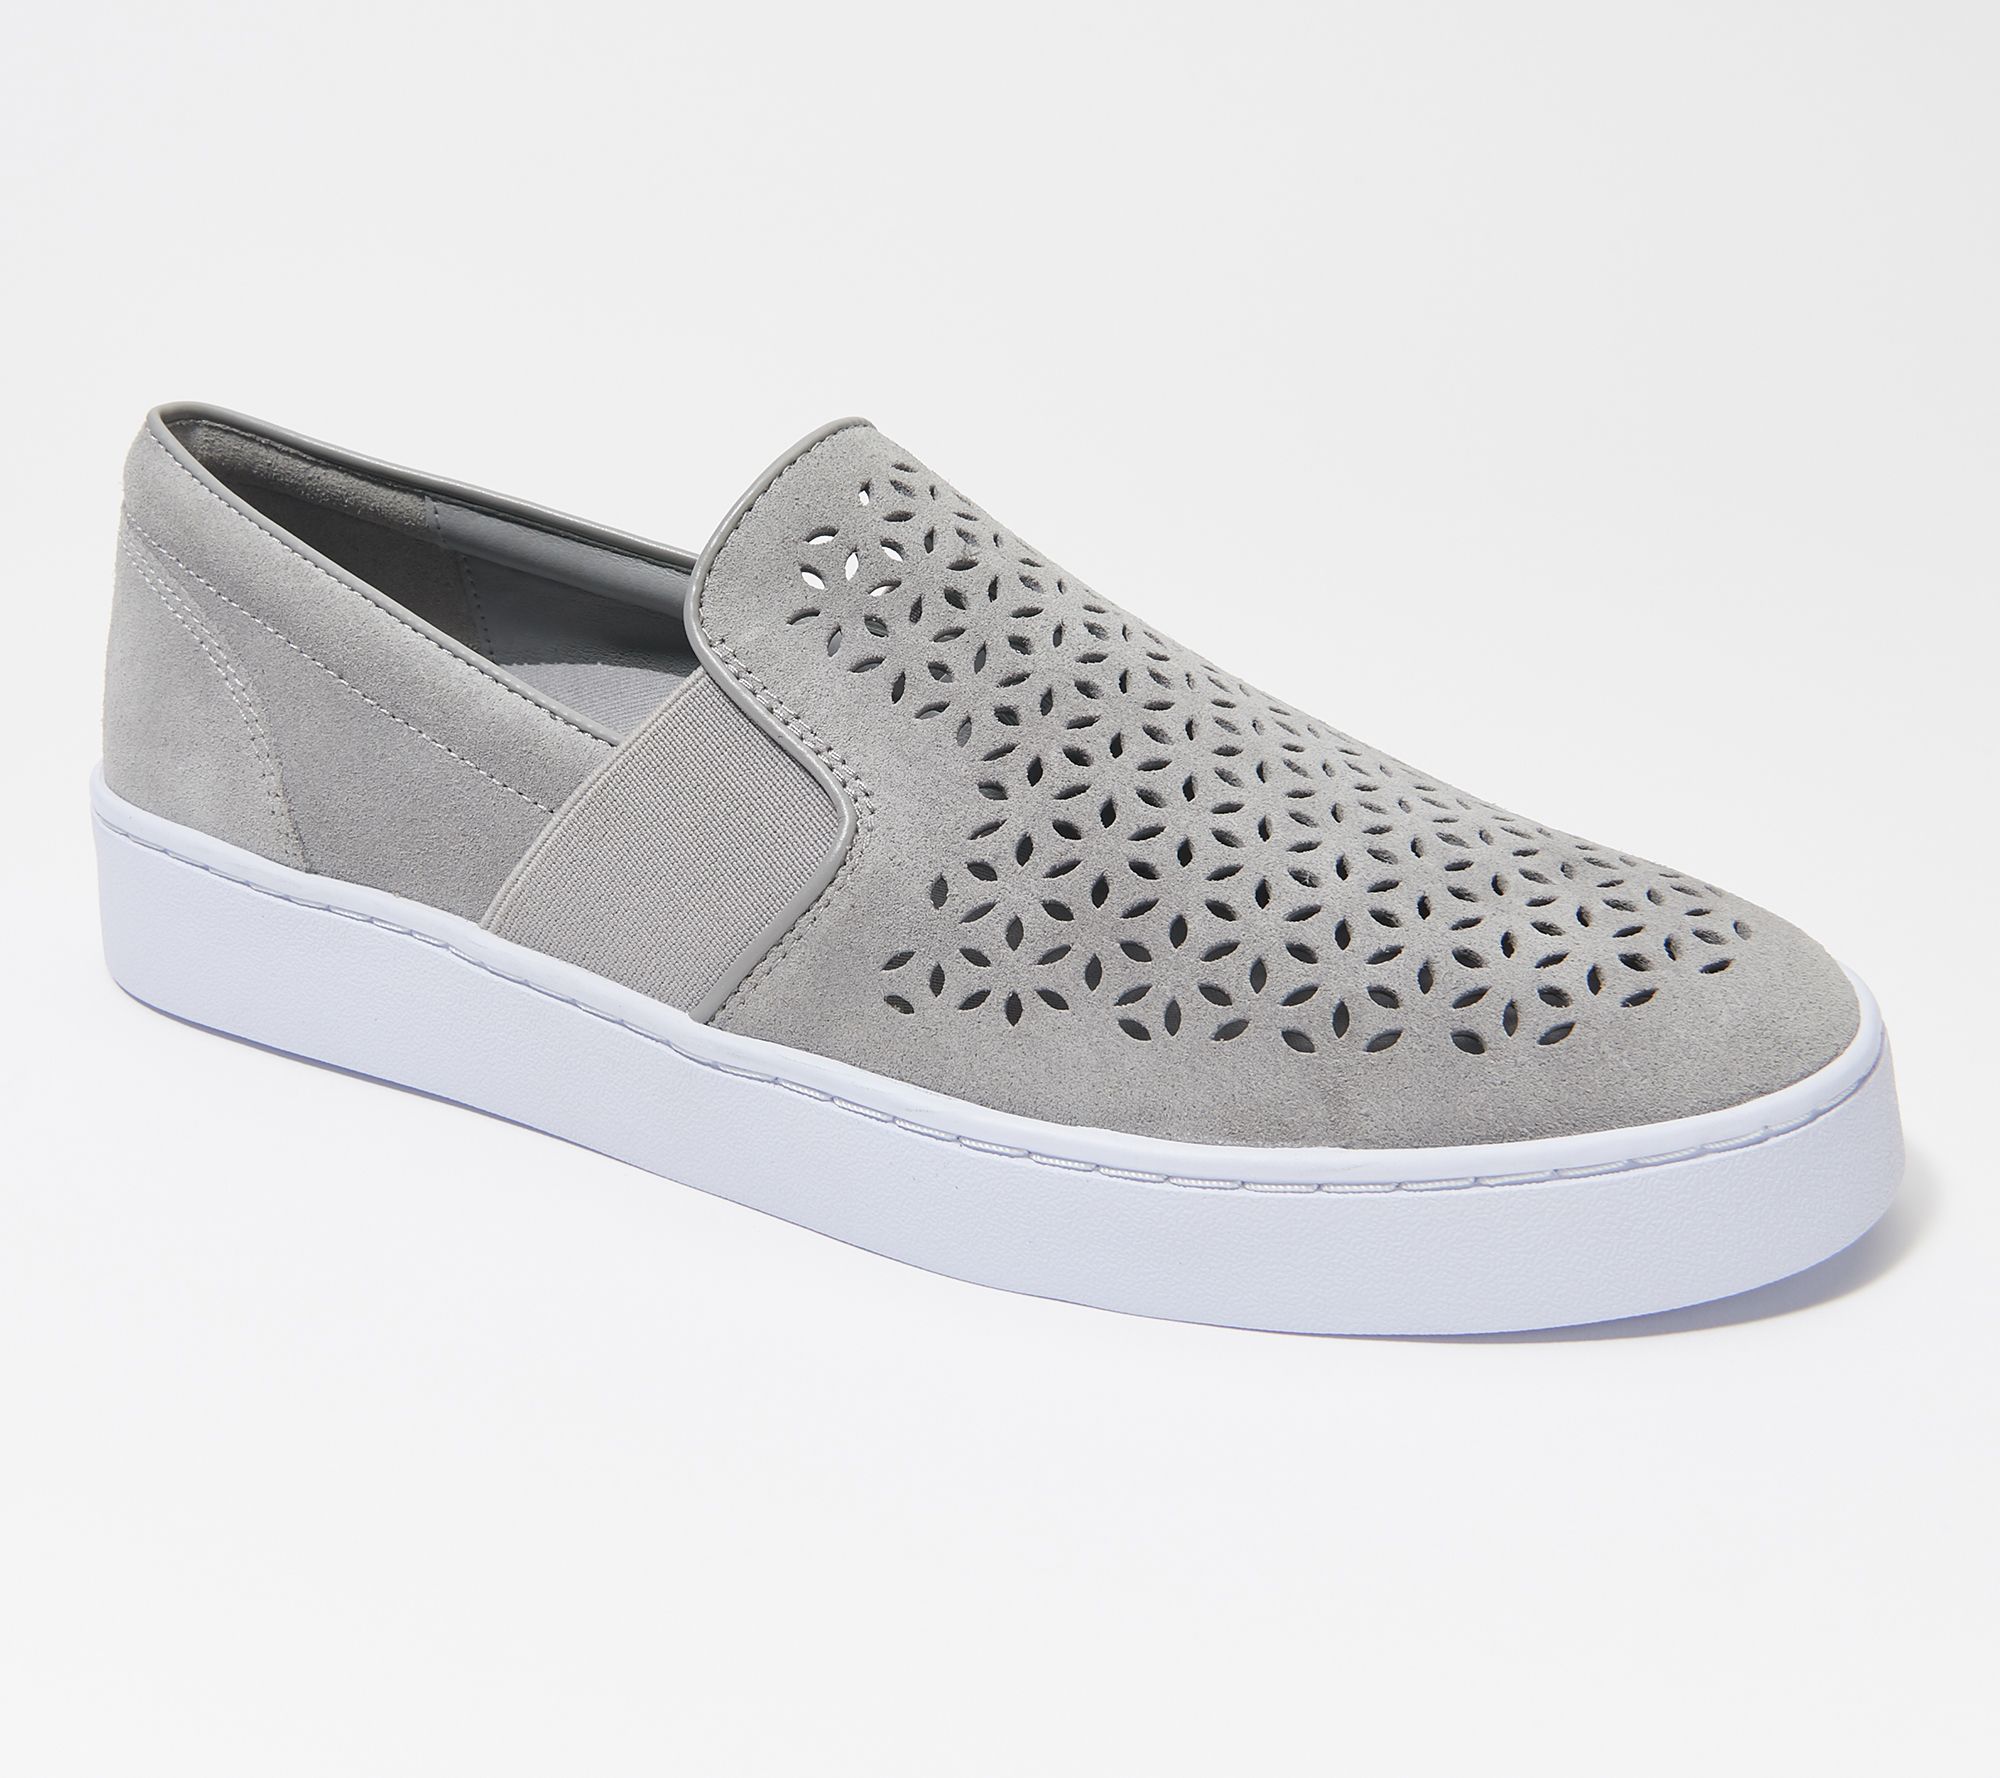 Vionic Suede Perforated Slip-On 